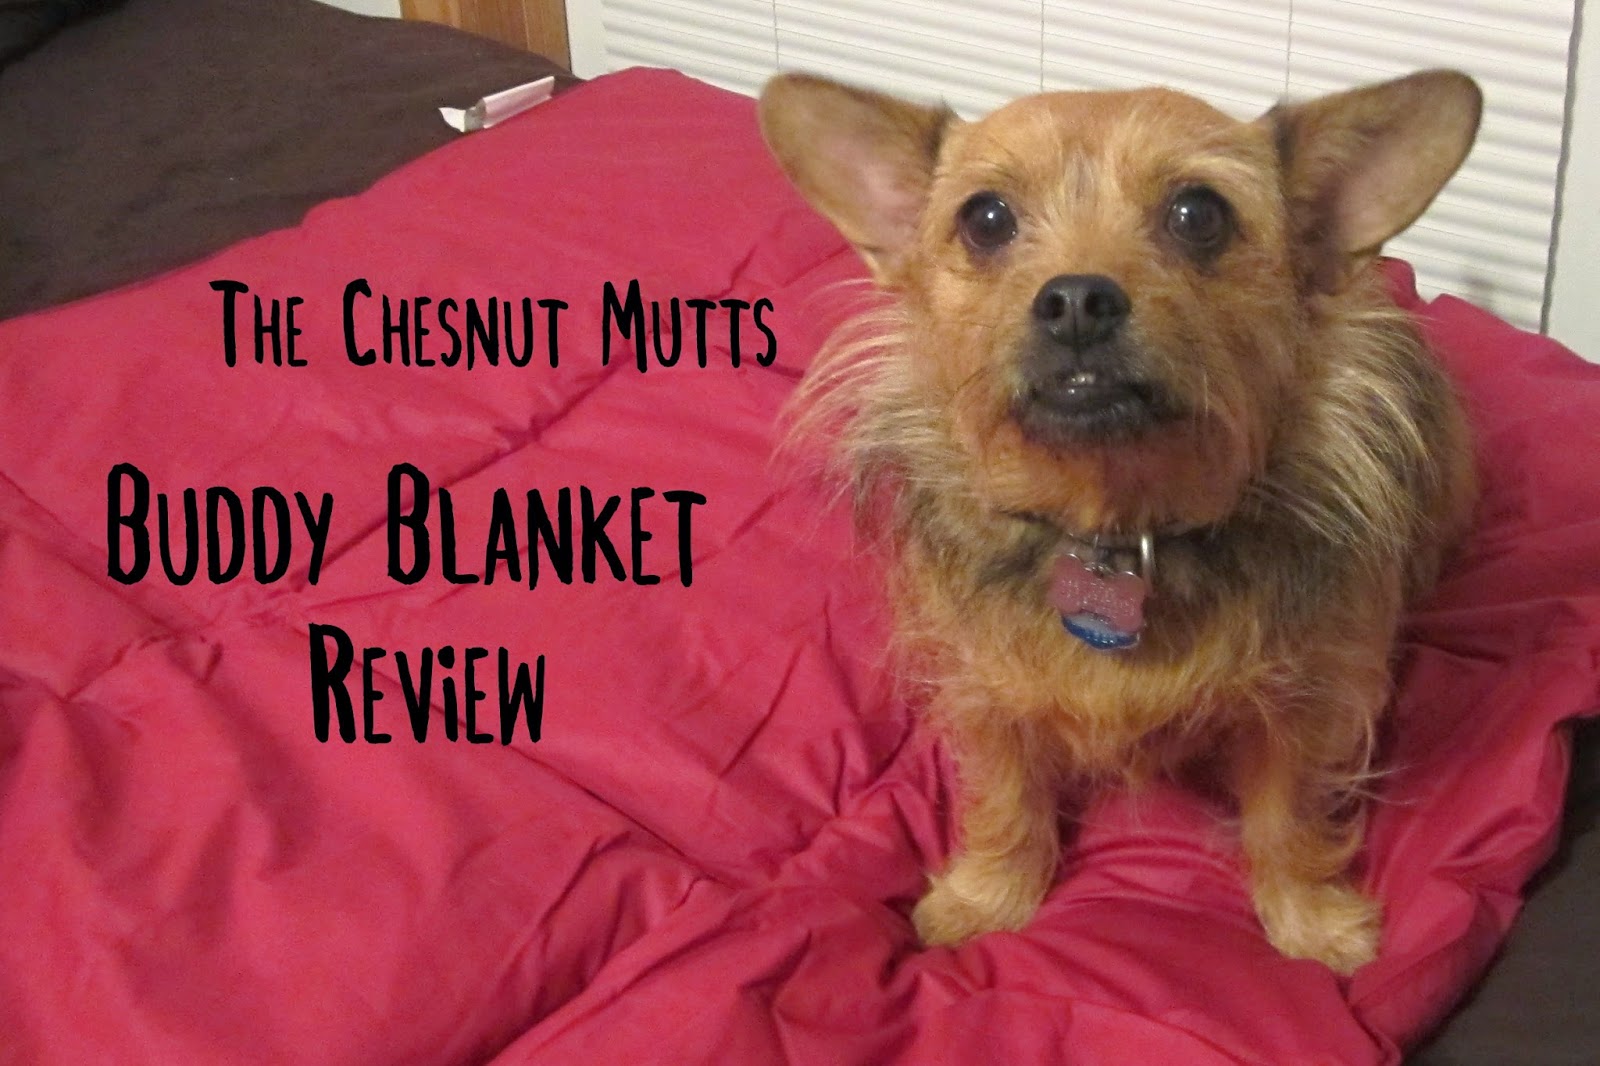 The Chesnut Mutts Buddy Blanket Review